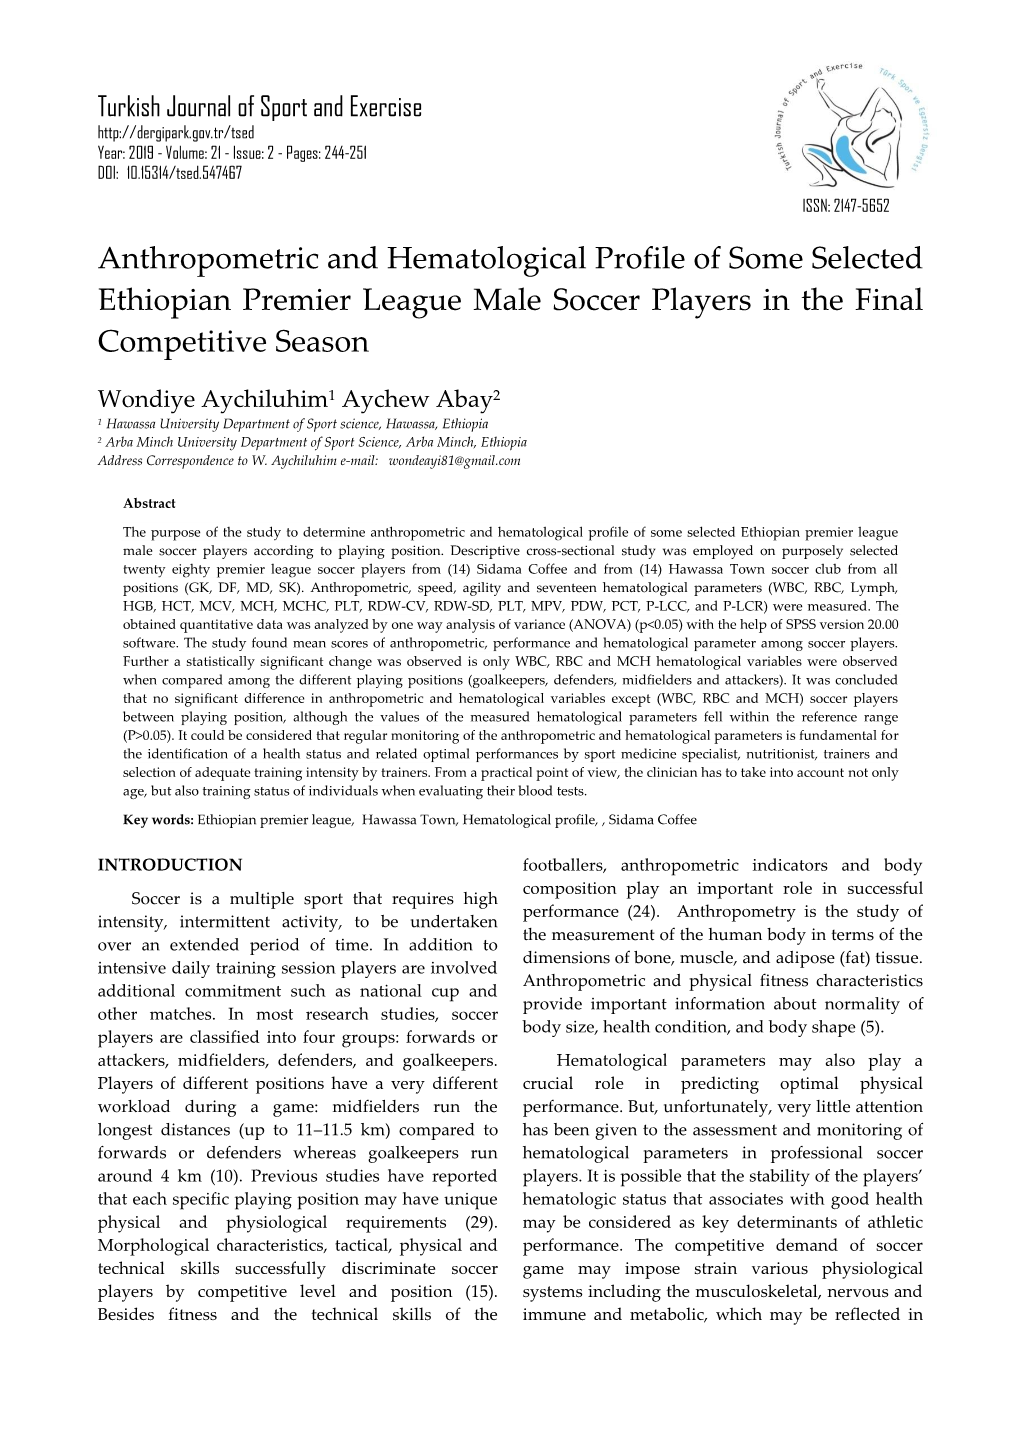 Anthropometric and Hematological Profile of Some Selected Ethiopian Premier League Male Soccer Players in the Final Competitive Season